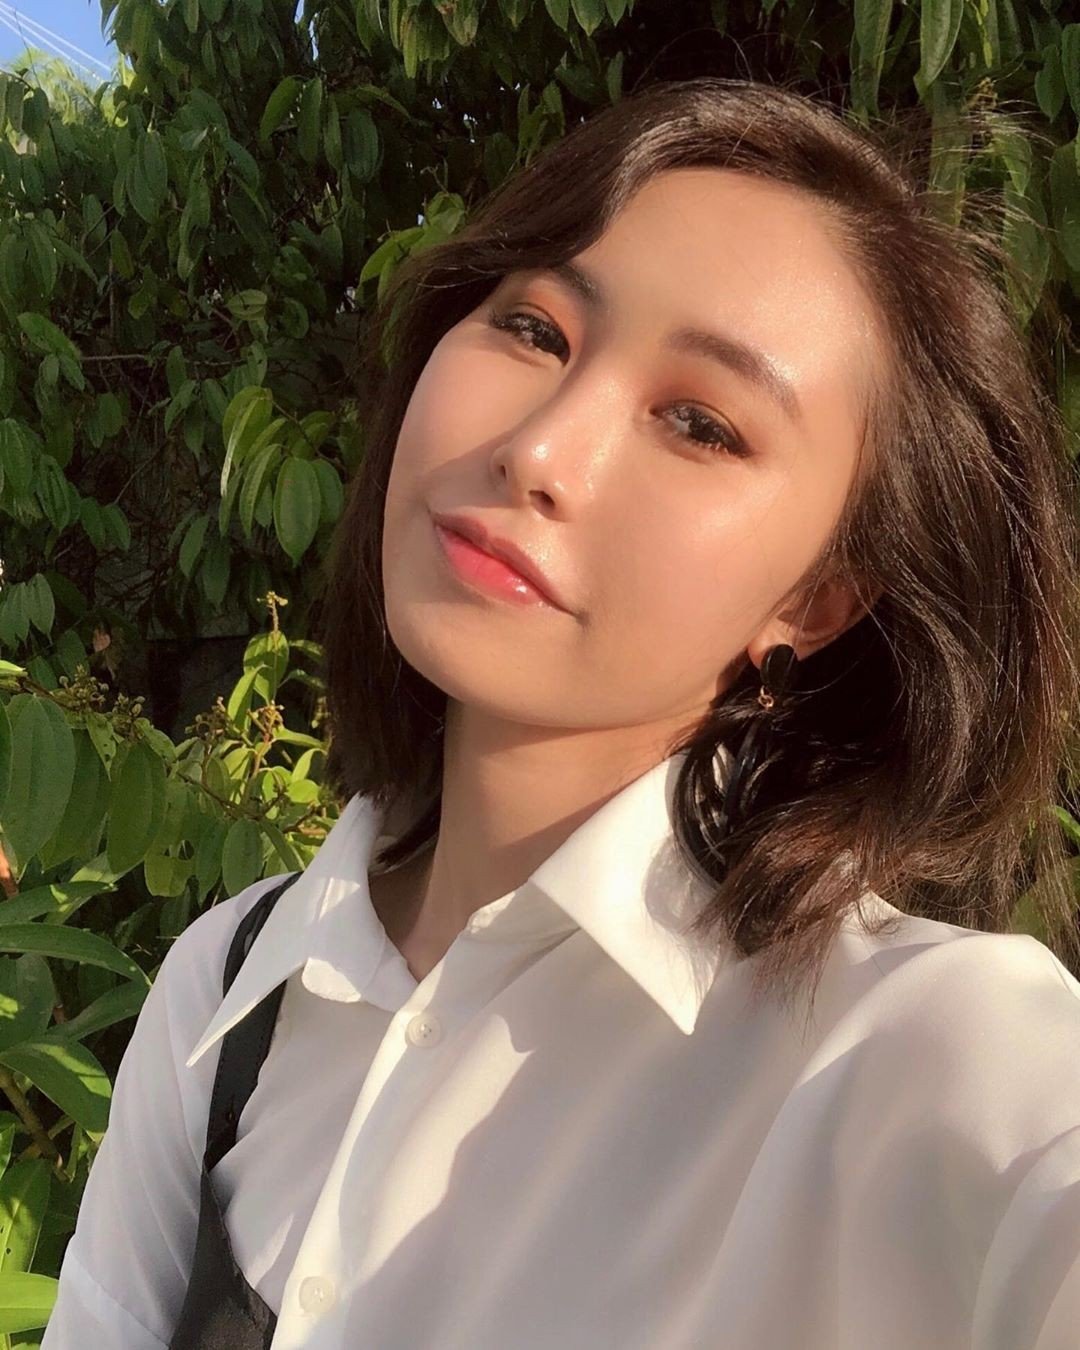 Miss Singapore International was criticised for her performance at a Japanese shrine, but she got back at her haters on Instagram. Photo: @charlottexlucille/Instagram